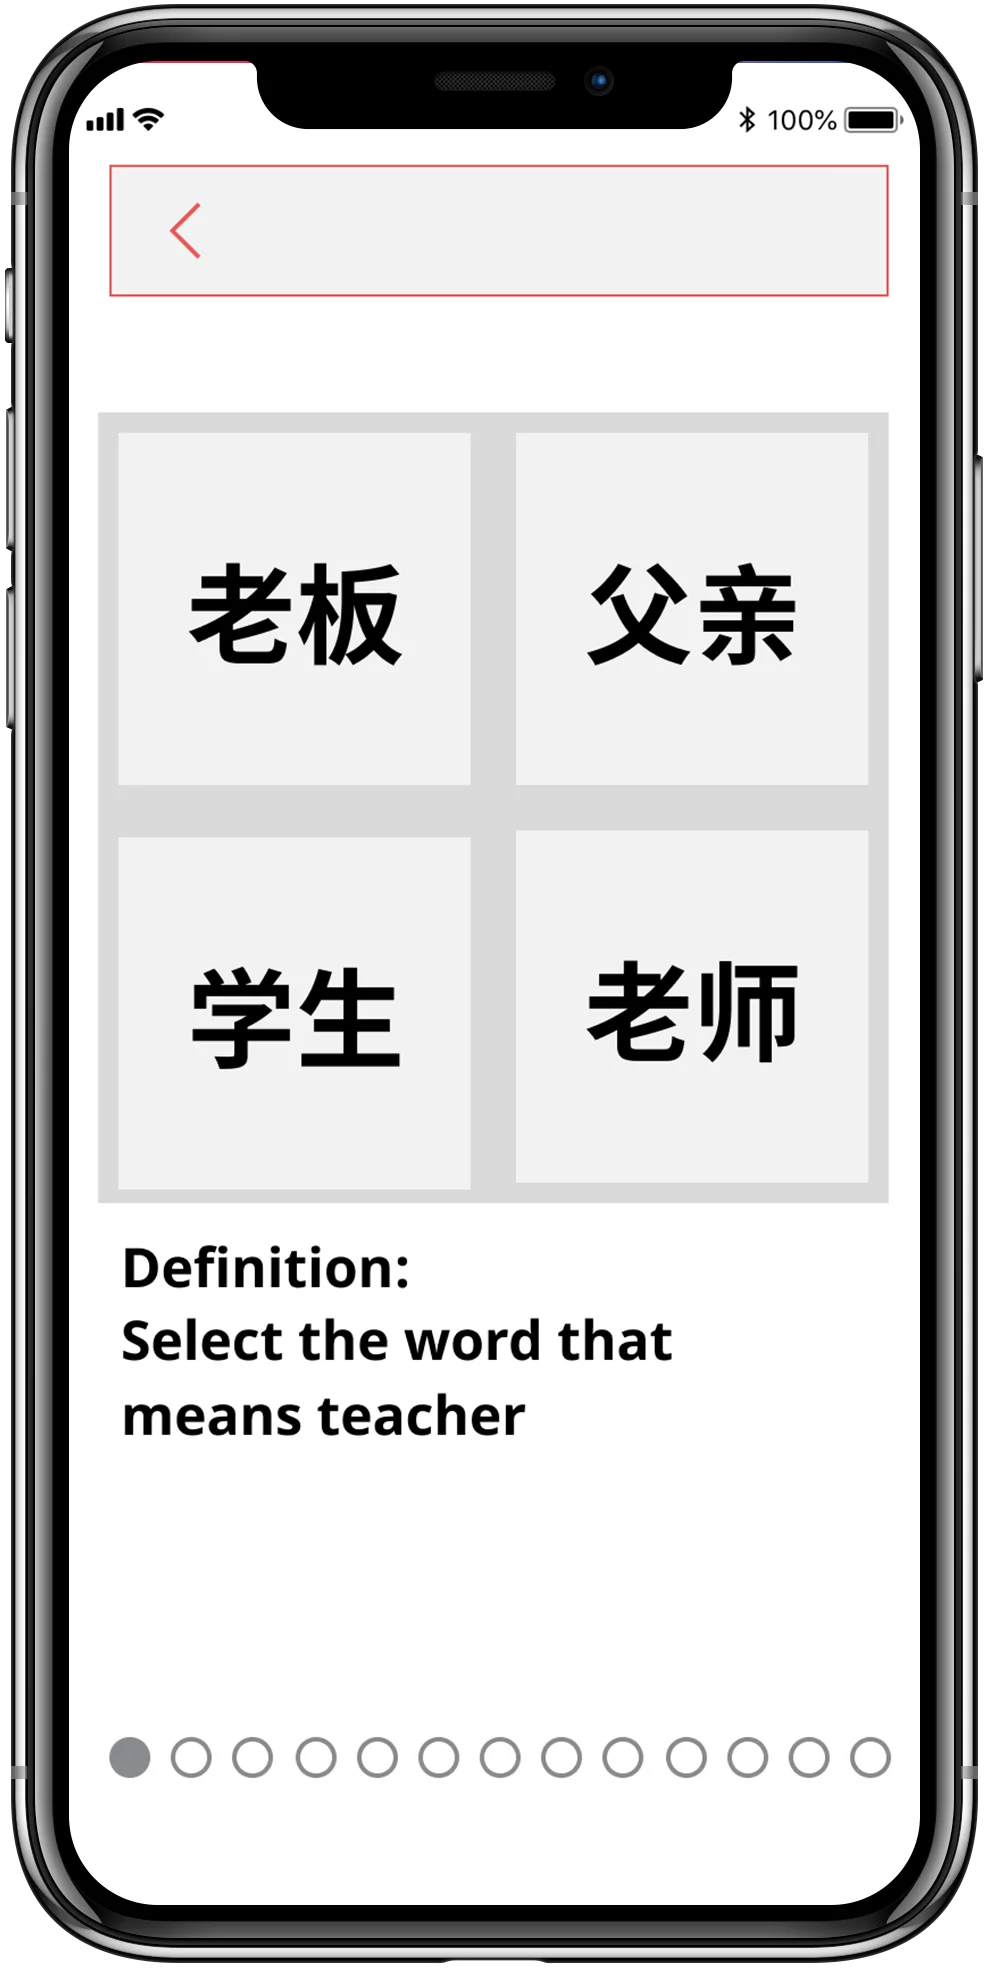 Screen asking to select Chinese characters that mean teacher out of 4 choices.